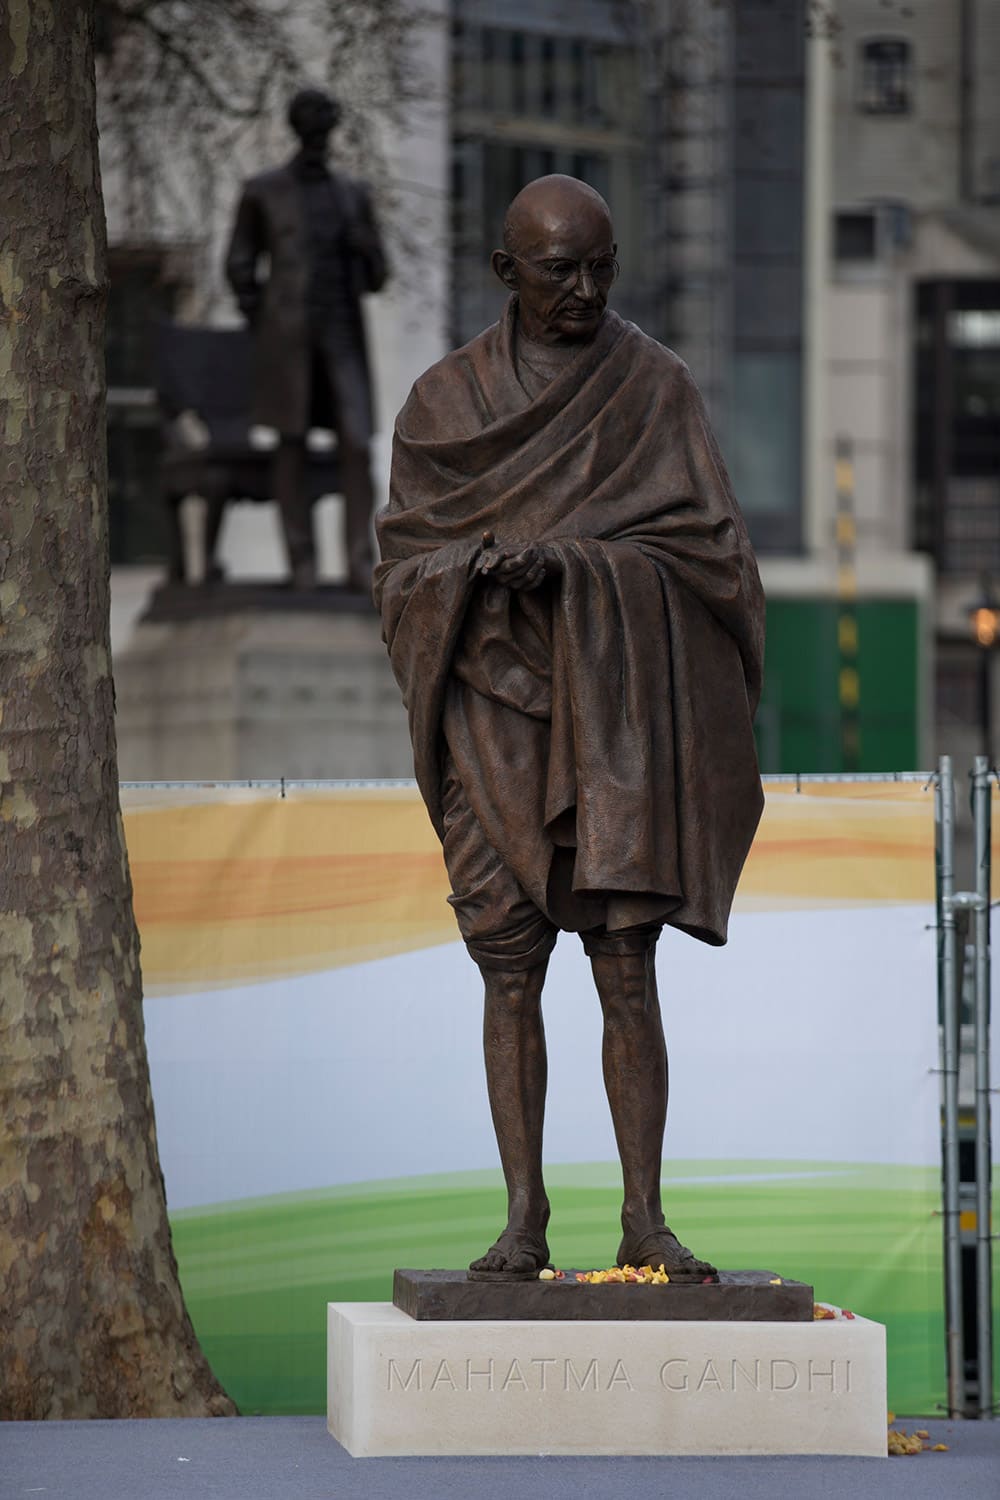 A new statue of Mahatma Gandhi by British sculptor Philip Jackson stands on display after it was unveiled in Parliament Square, London. The bronze sculpture stands 9ft-high (2.75m) and will provide a focal point for commemorations of the 70th anniversary of Gandhi's death in 2018.